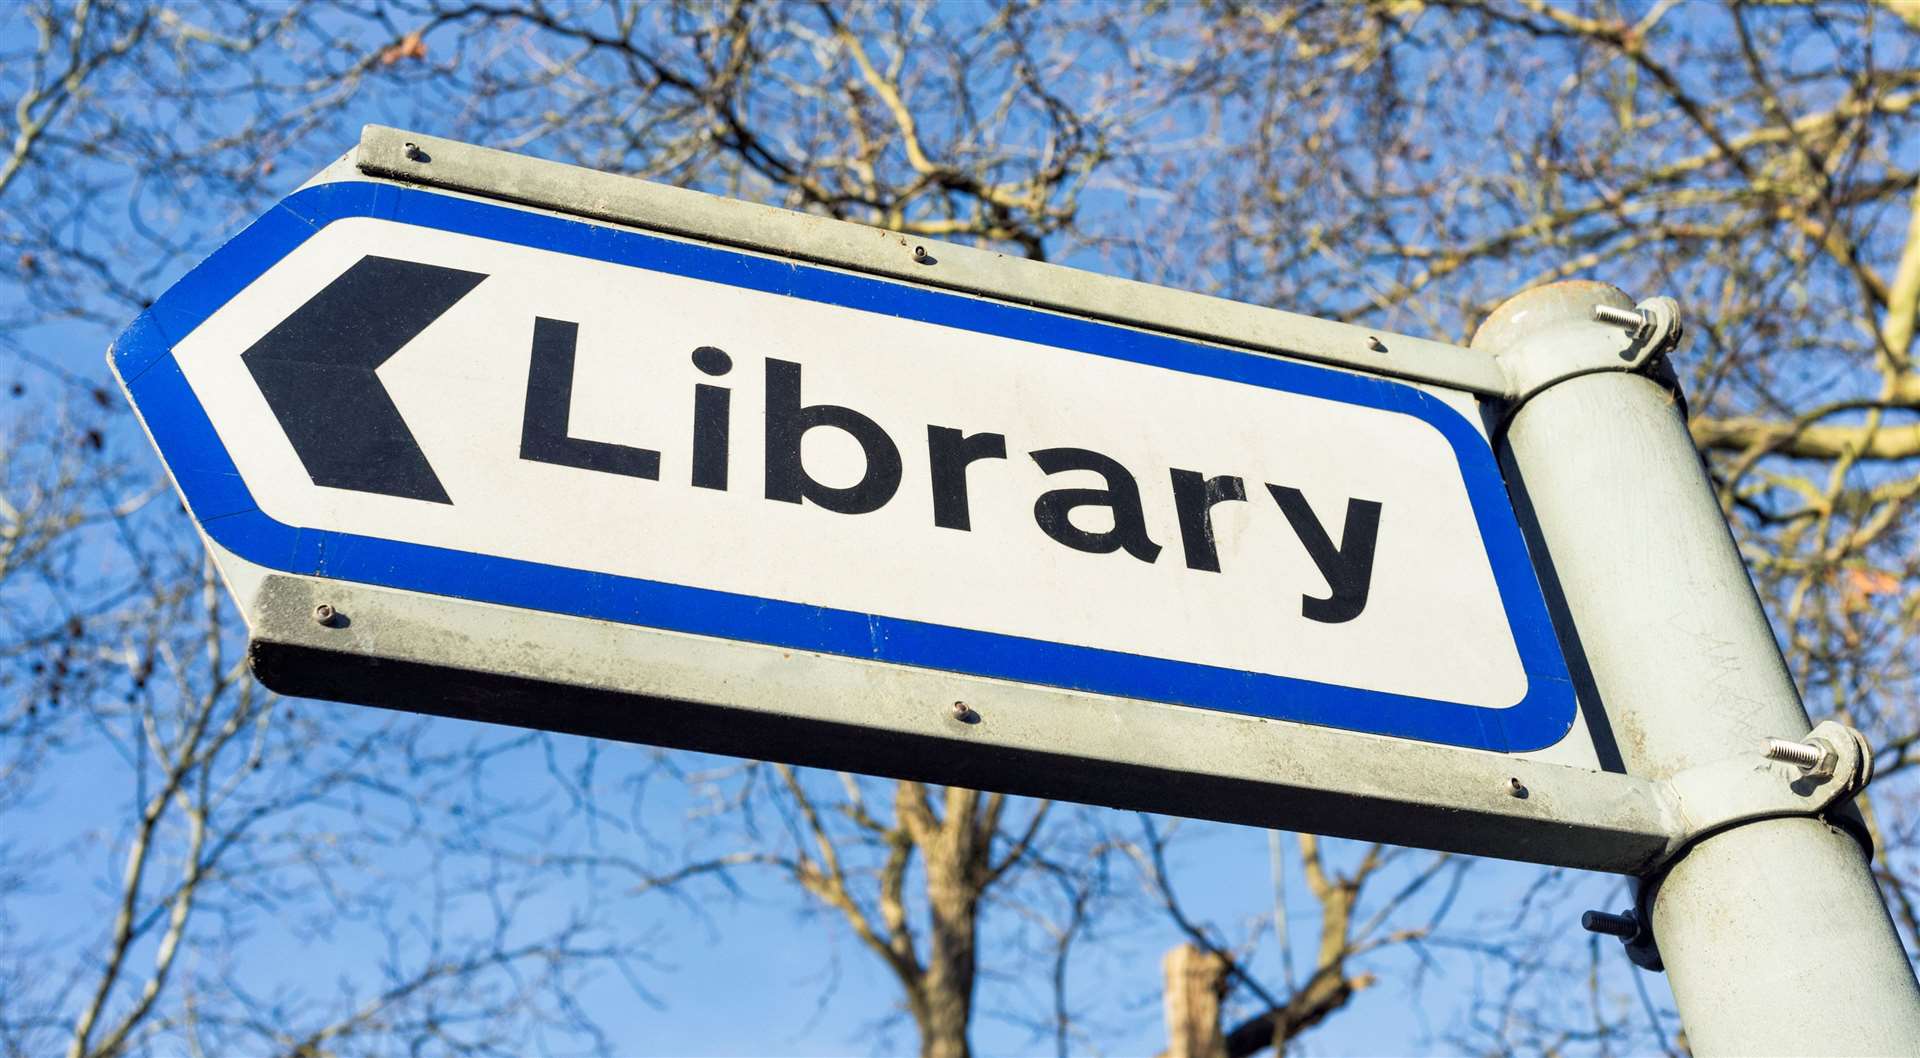 The council currently have no plans to close libraries